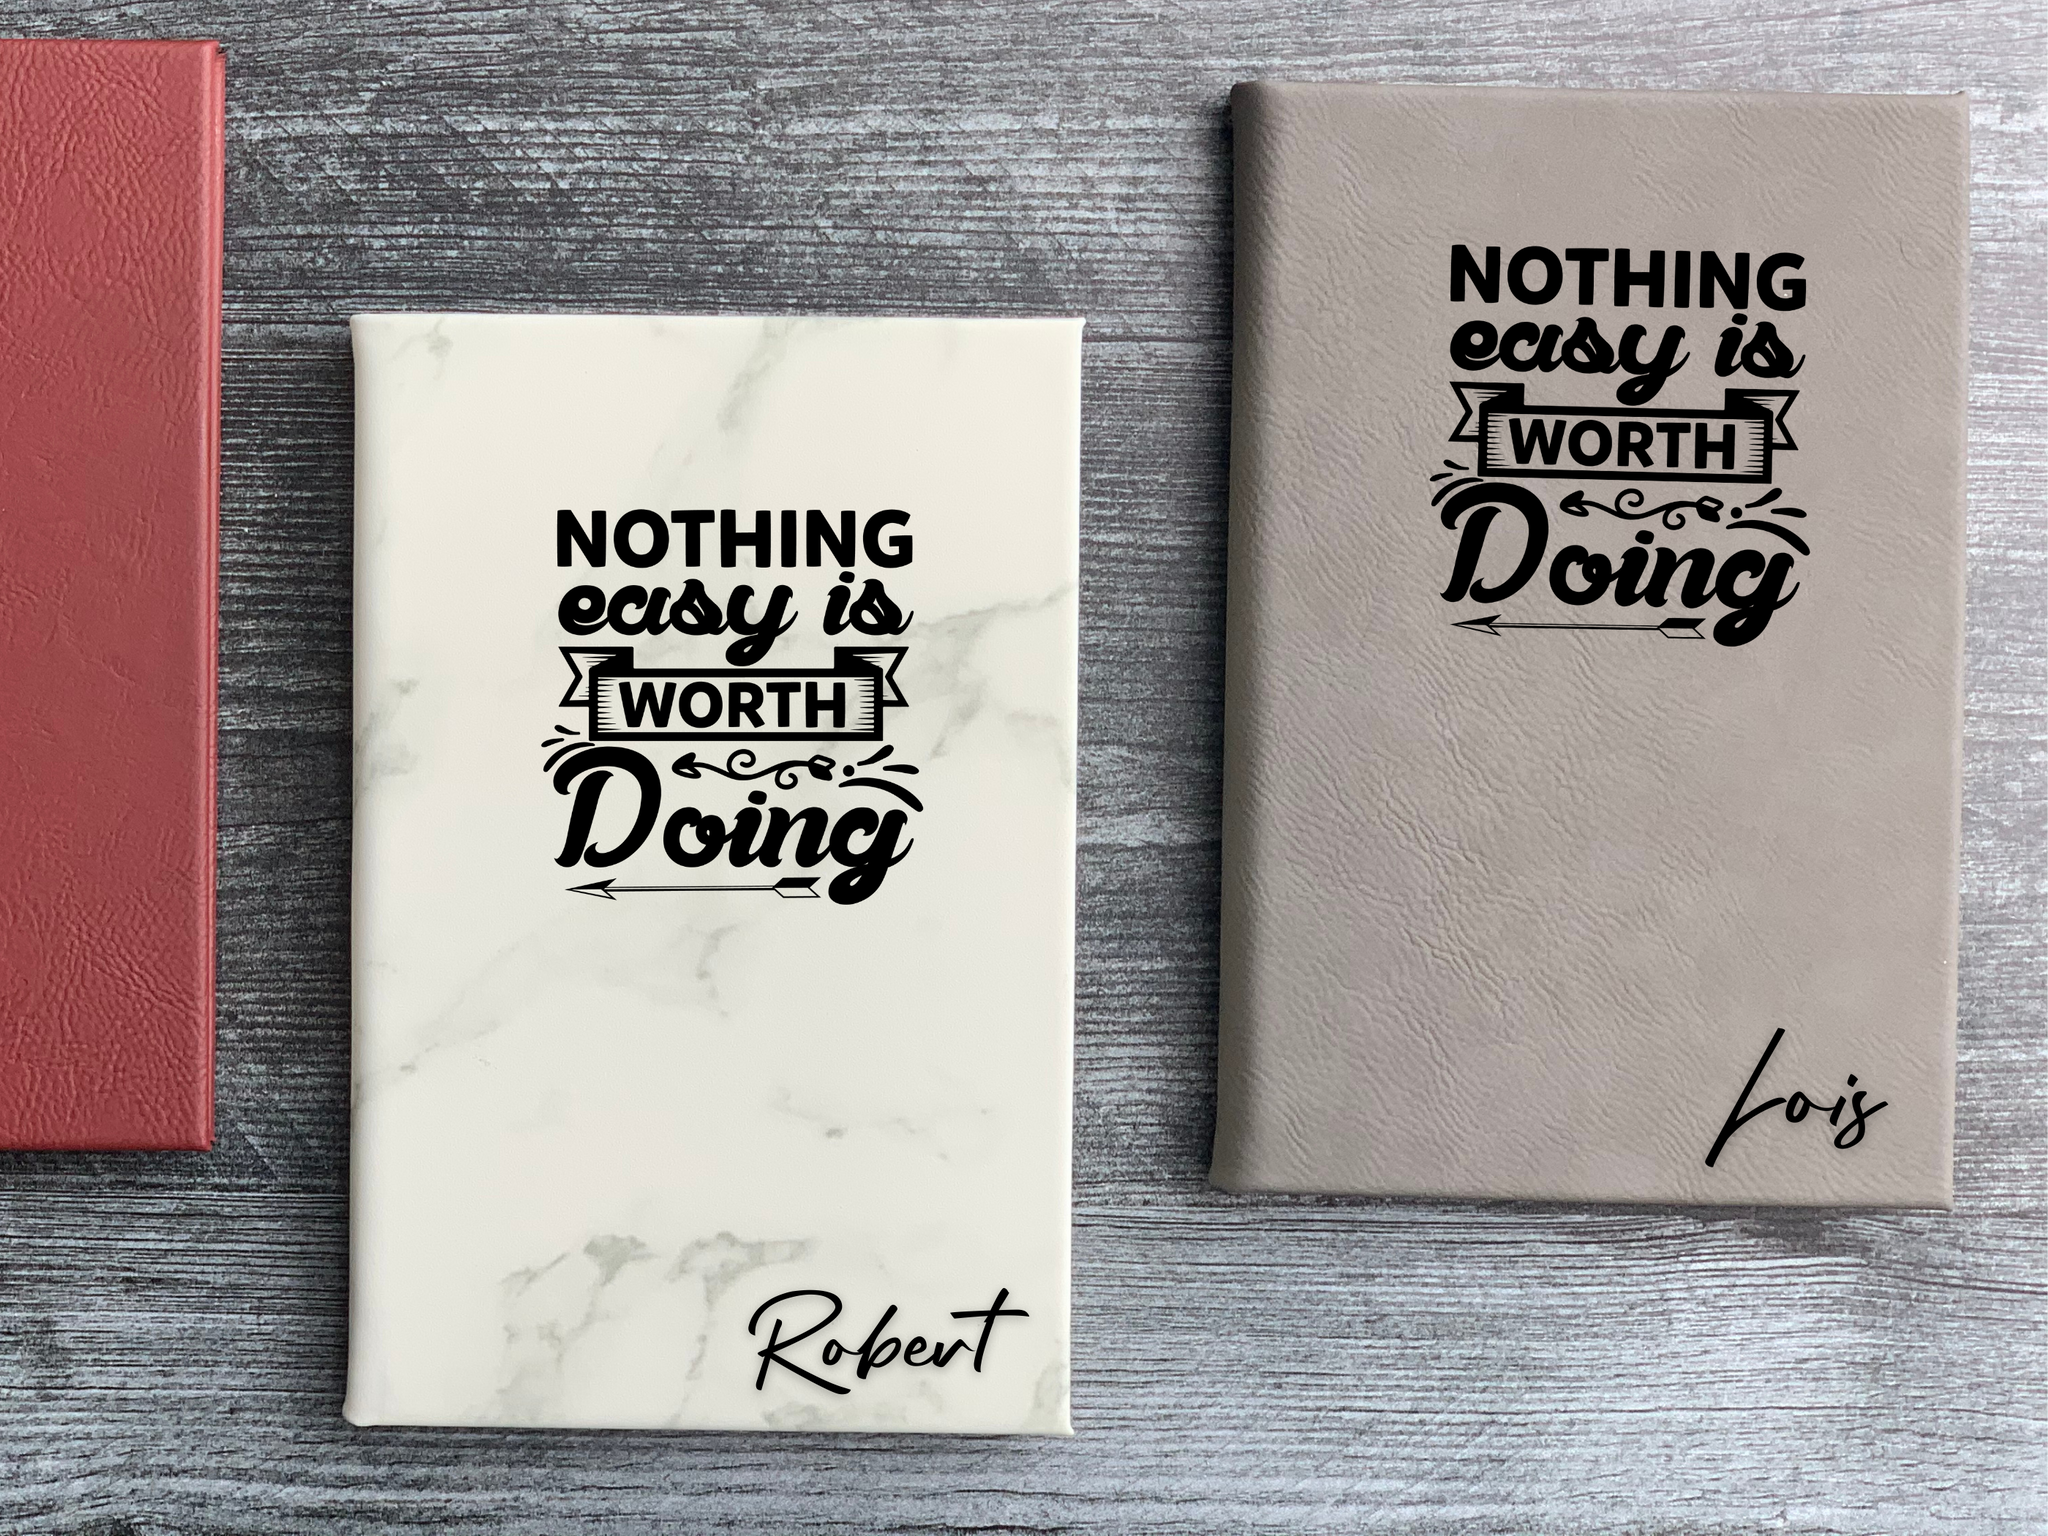 Personalized Journal, Nothing Easy is Worth Doing, Gift for Entrepreneurs